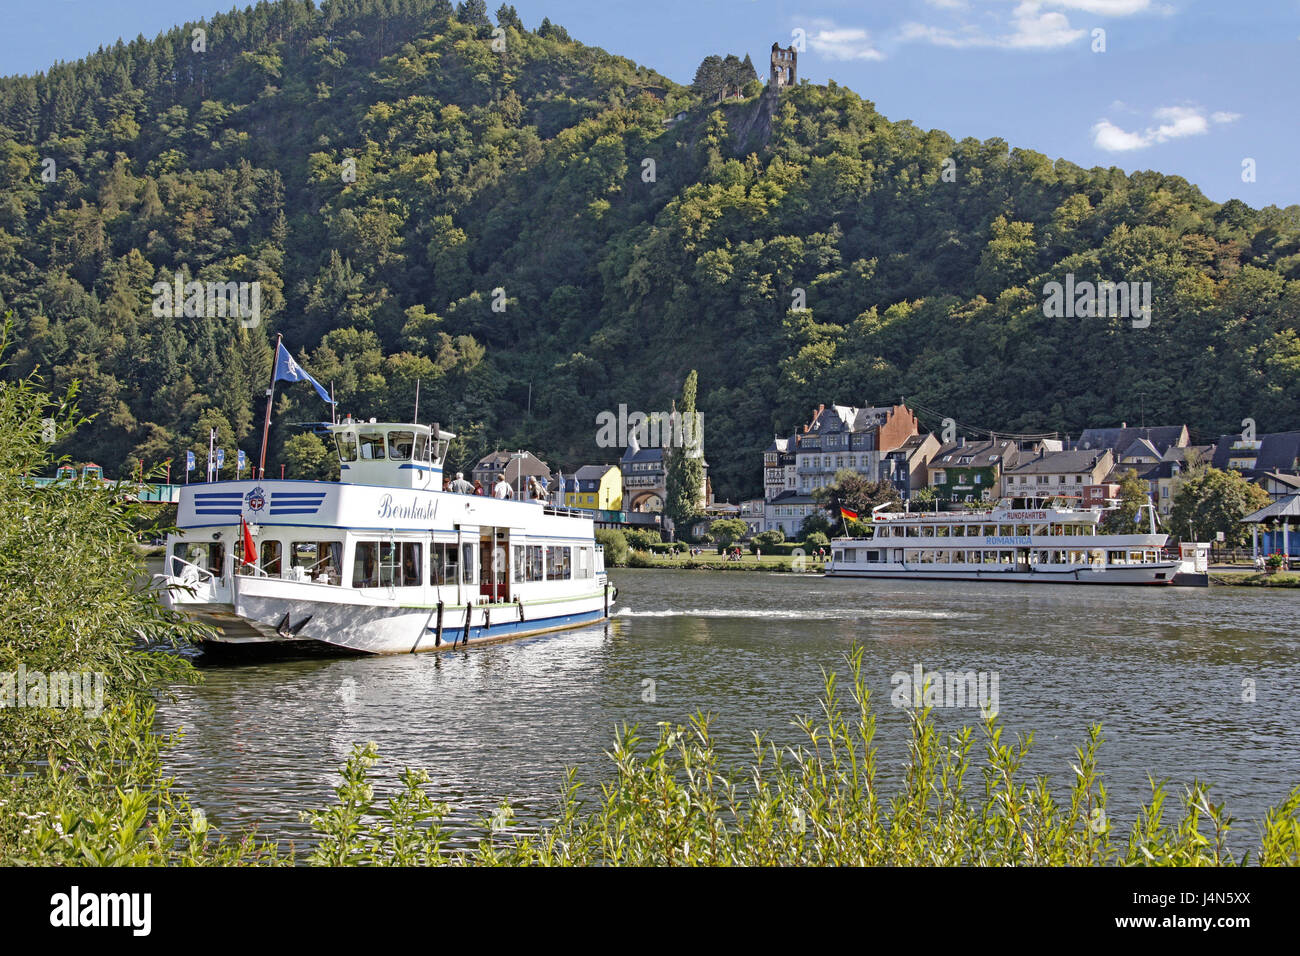 Germany, Rhineland-Palatinate, Traben-Trarbach, district brook Trar, the Moselle, holiday ships, place of interest, destination, tourism, town, town view, river, ships, riverboat journey, Moselle ships, Moselle bridge, hill, castle ruin, ruin, castle, Stock Photo